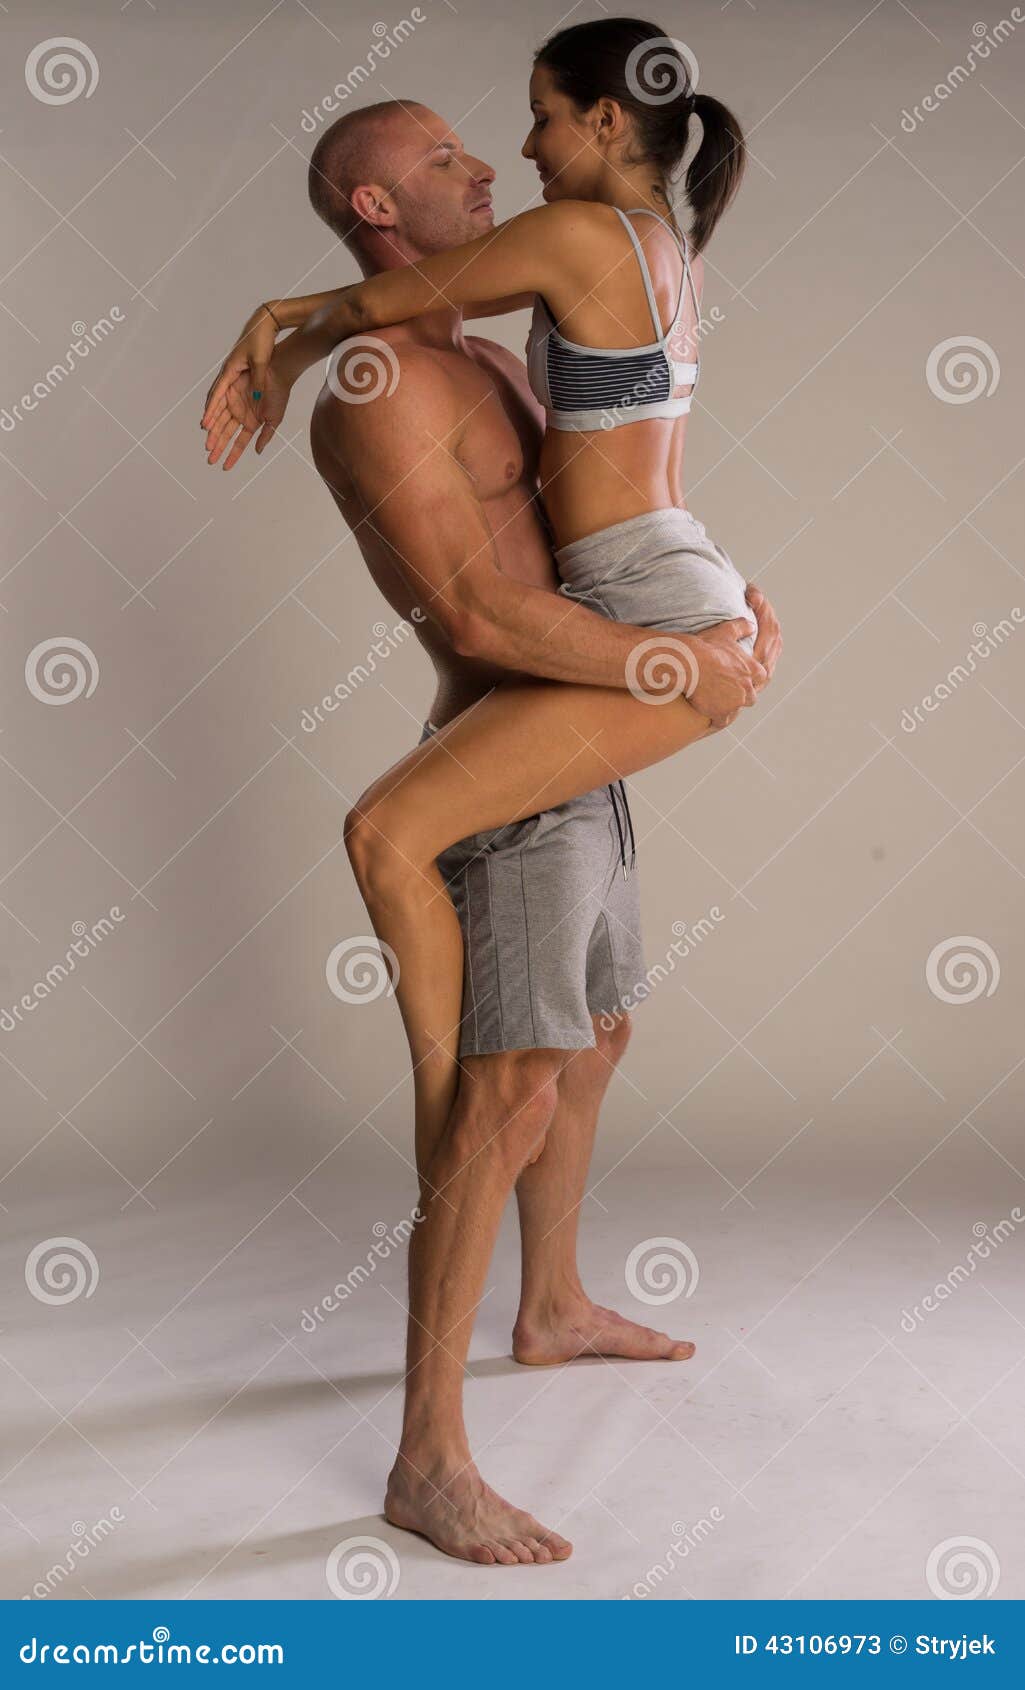 athletic physical romantic couple